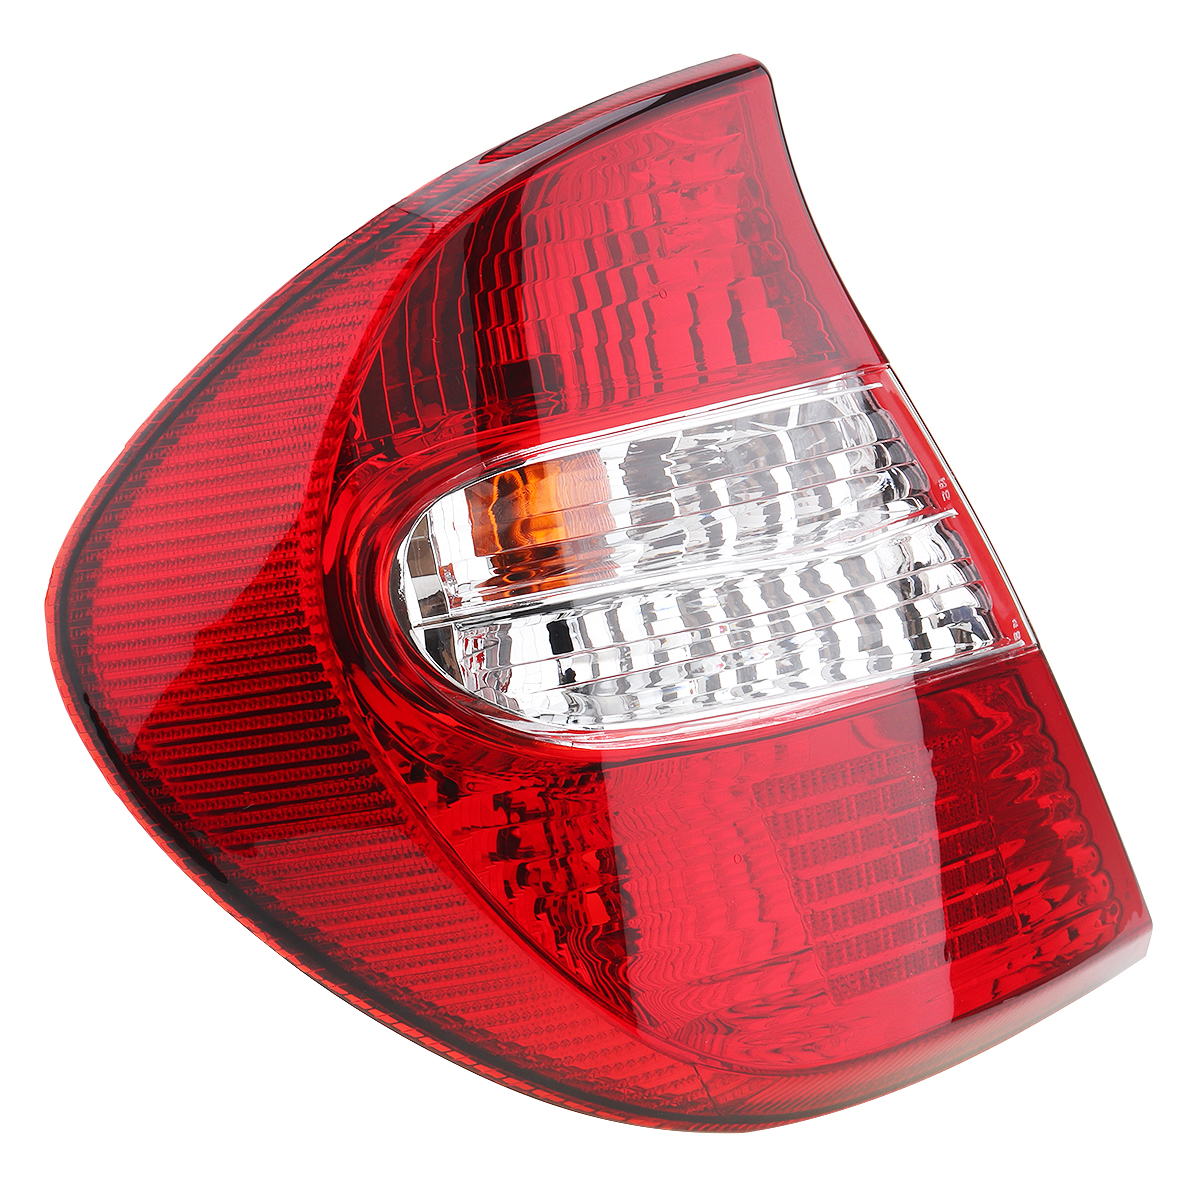 Waterproof Rear Tail Light Left Side LH fits Toyota ACV30 Toyota Camry ...